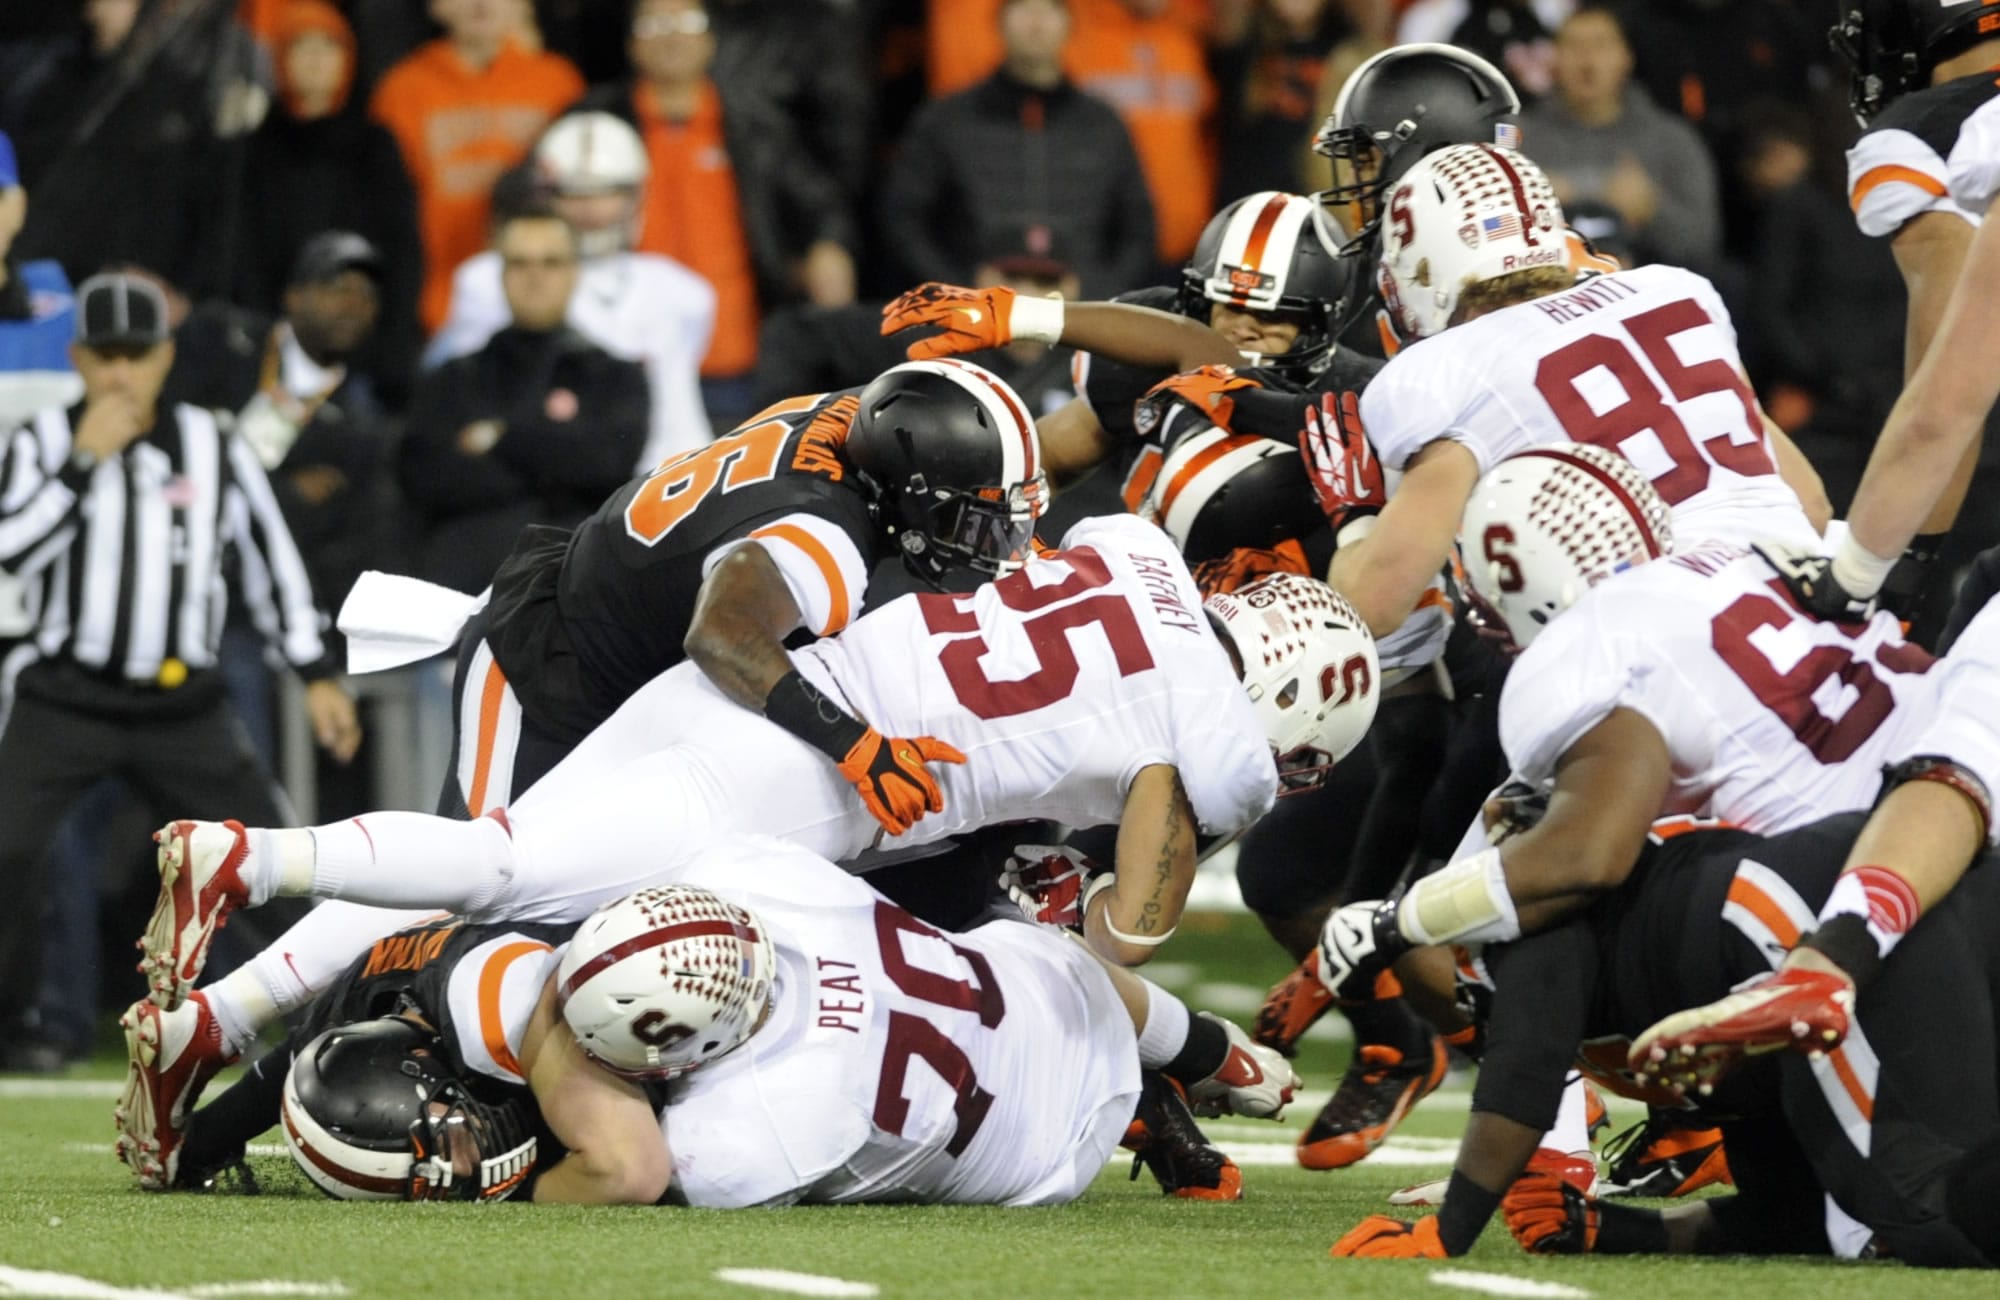 Stanford's Tyler Gaffney (25) works against Oregon State defenders during the first half of an NCAA college football game in Corvallis, Ore., Saturday Oct. 26, 2013.